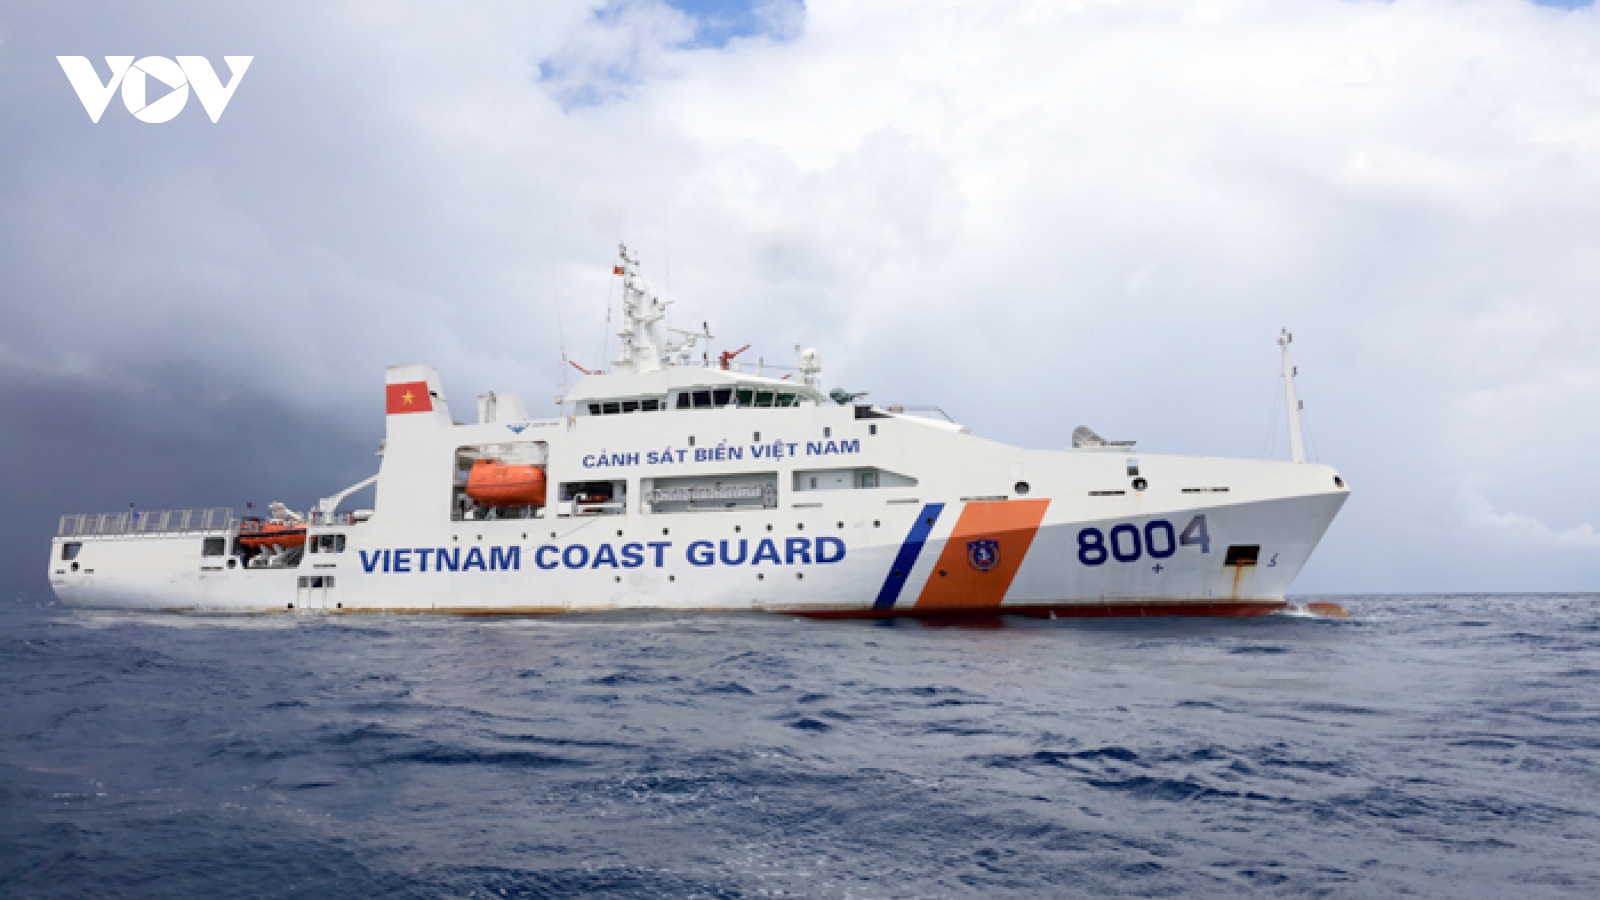 South African journalist hails Vietnam’s stance on maritime security